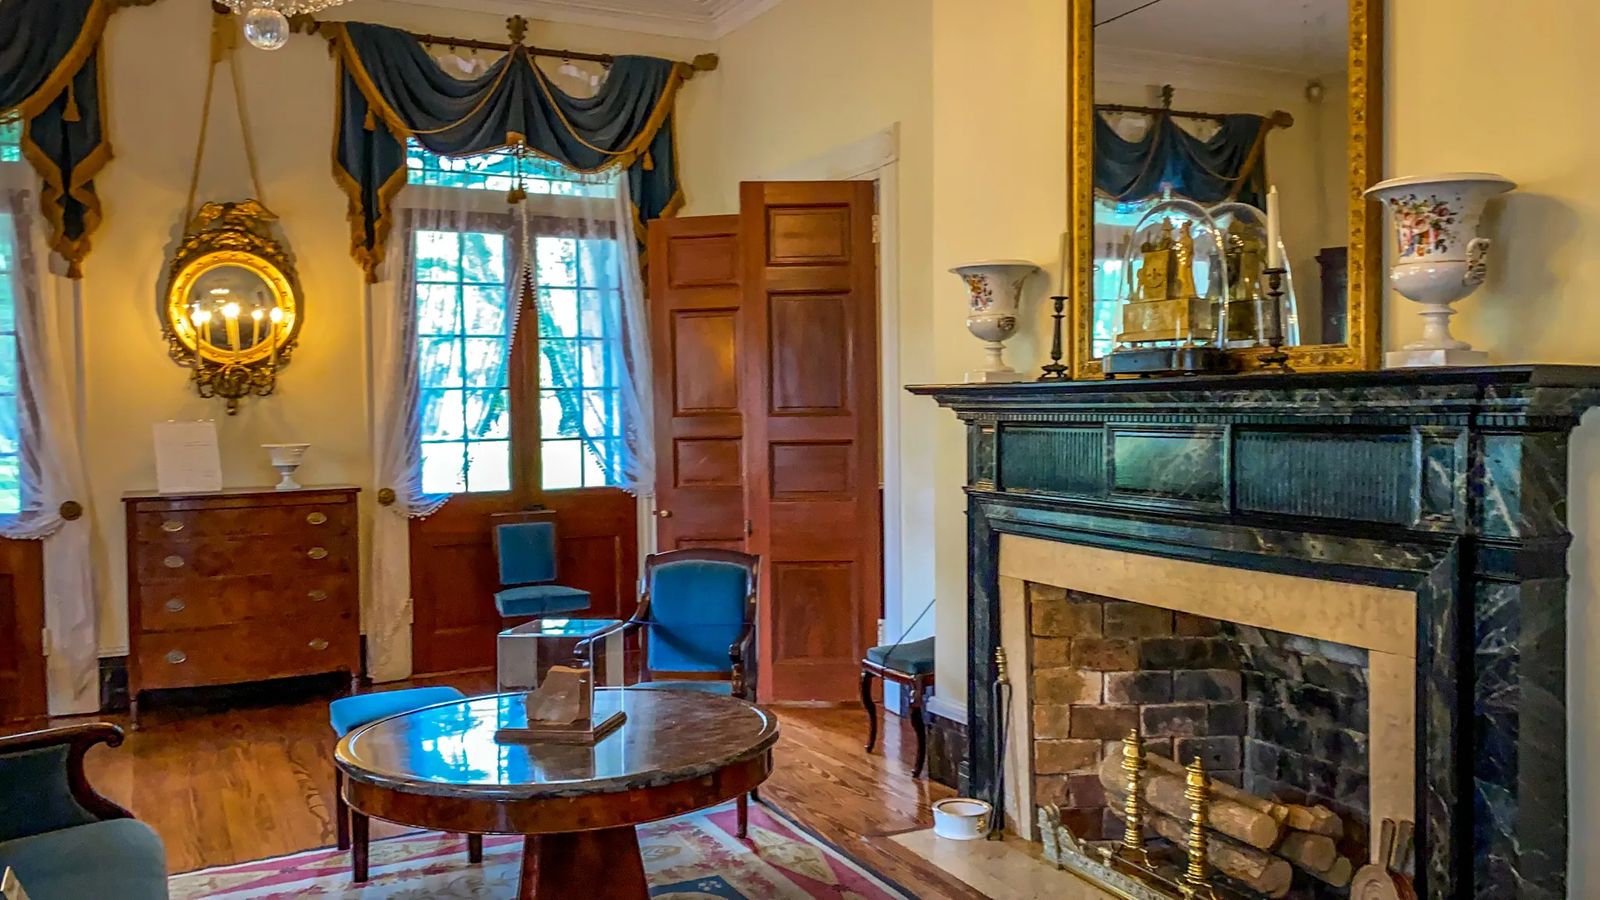 18th century period pieces with decorated windows and fake marble fireplace